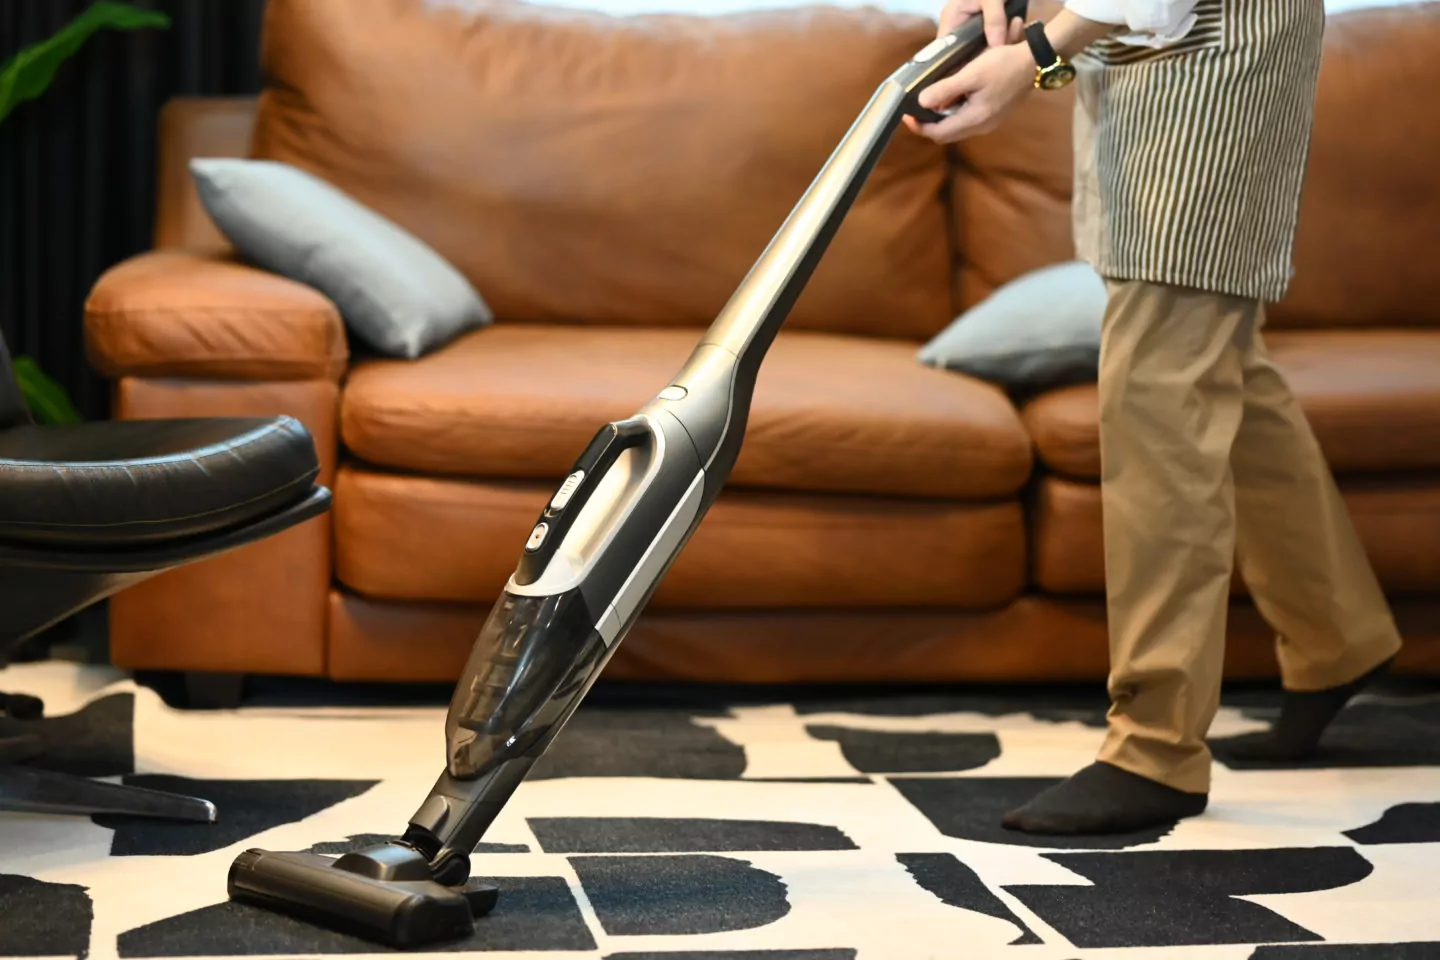 Man using cordless vacuum cleaner to removes germs and dirt on c